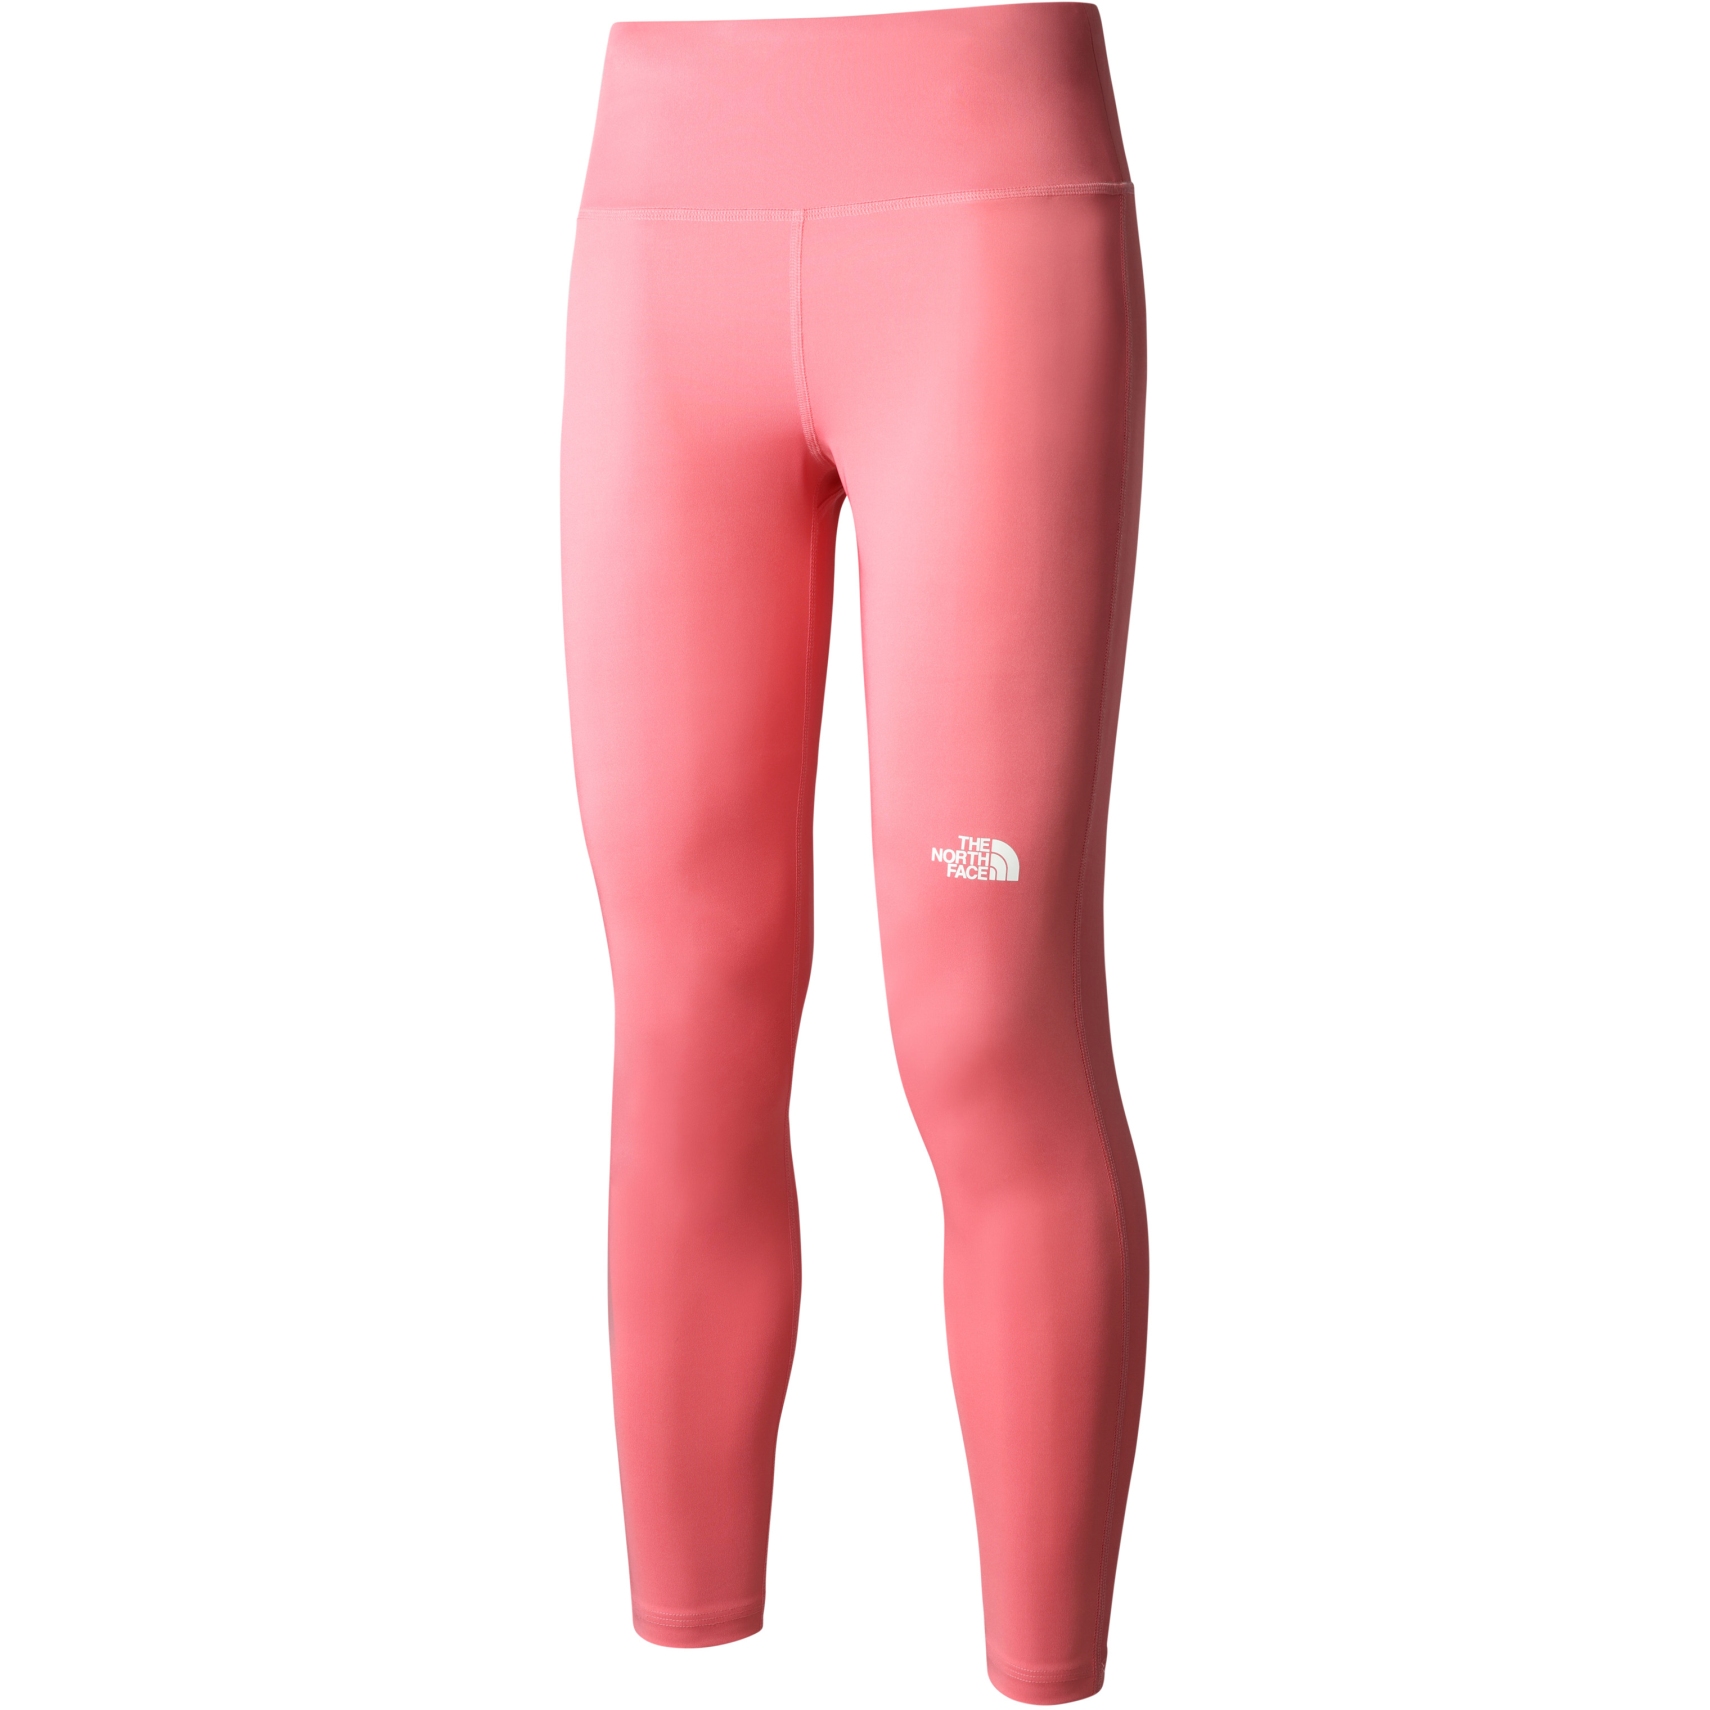 Women's The North Face Flex Mid Rise Tights, Tights & Leggings